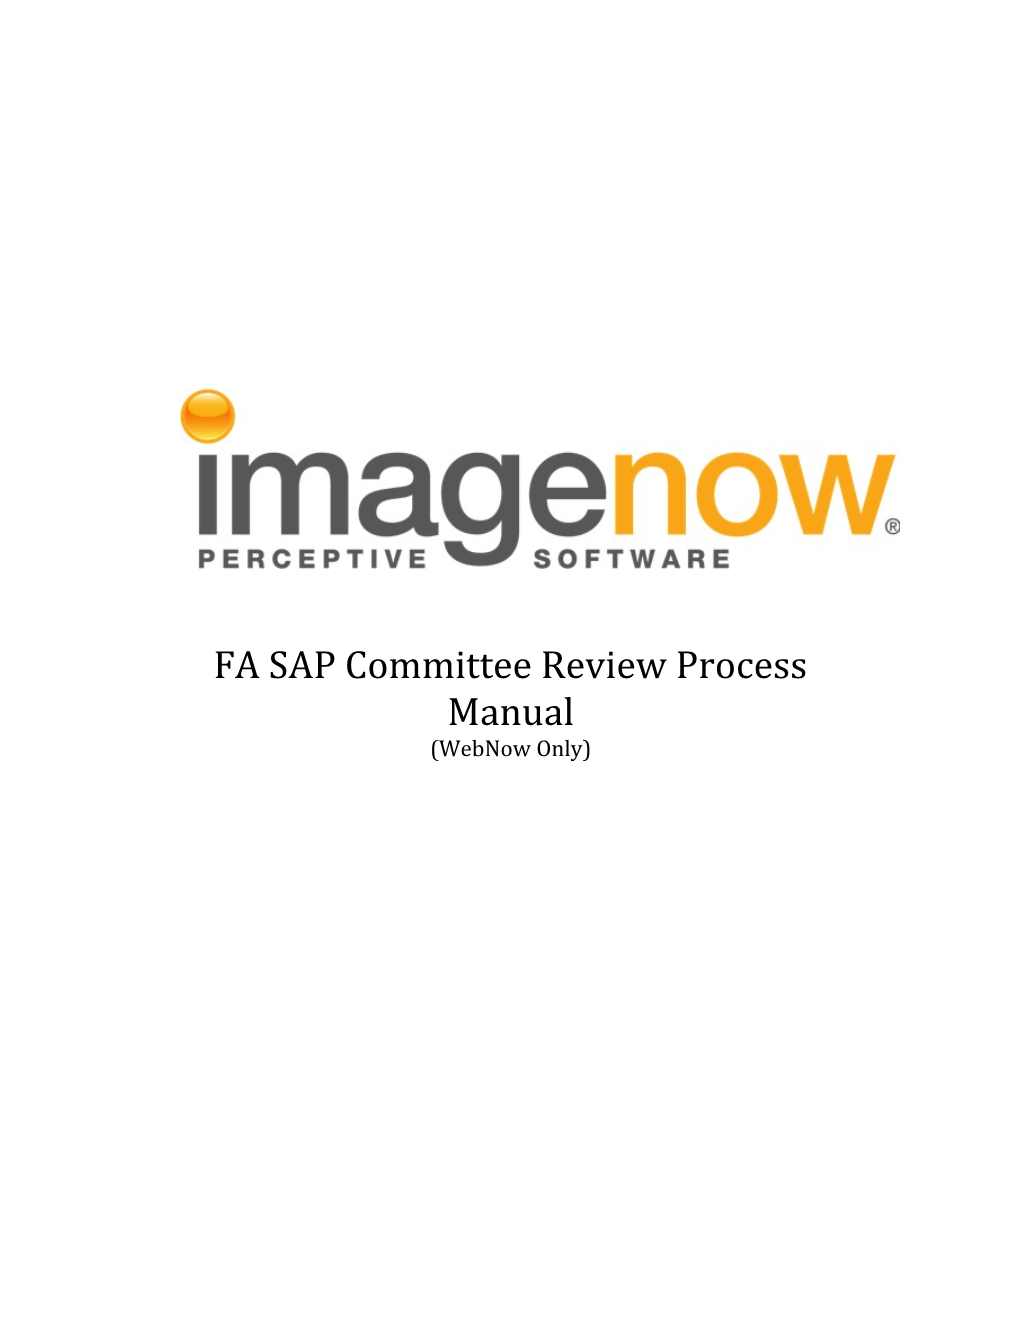 Imagenow FA SAP Committee Review Process